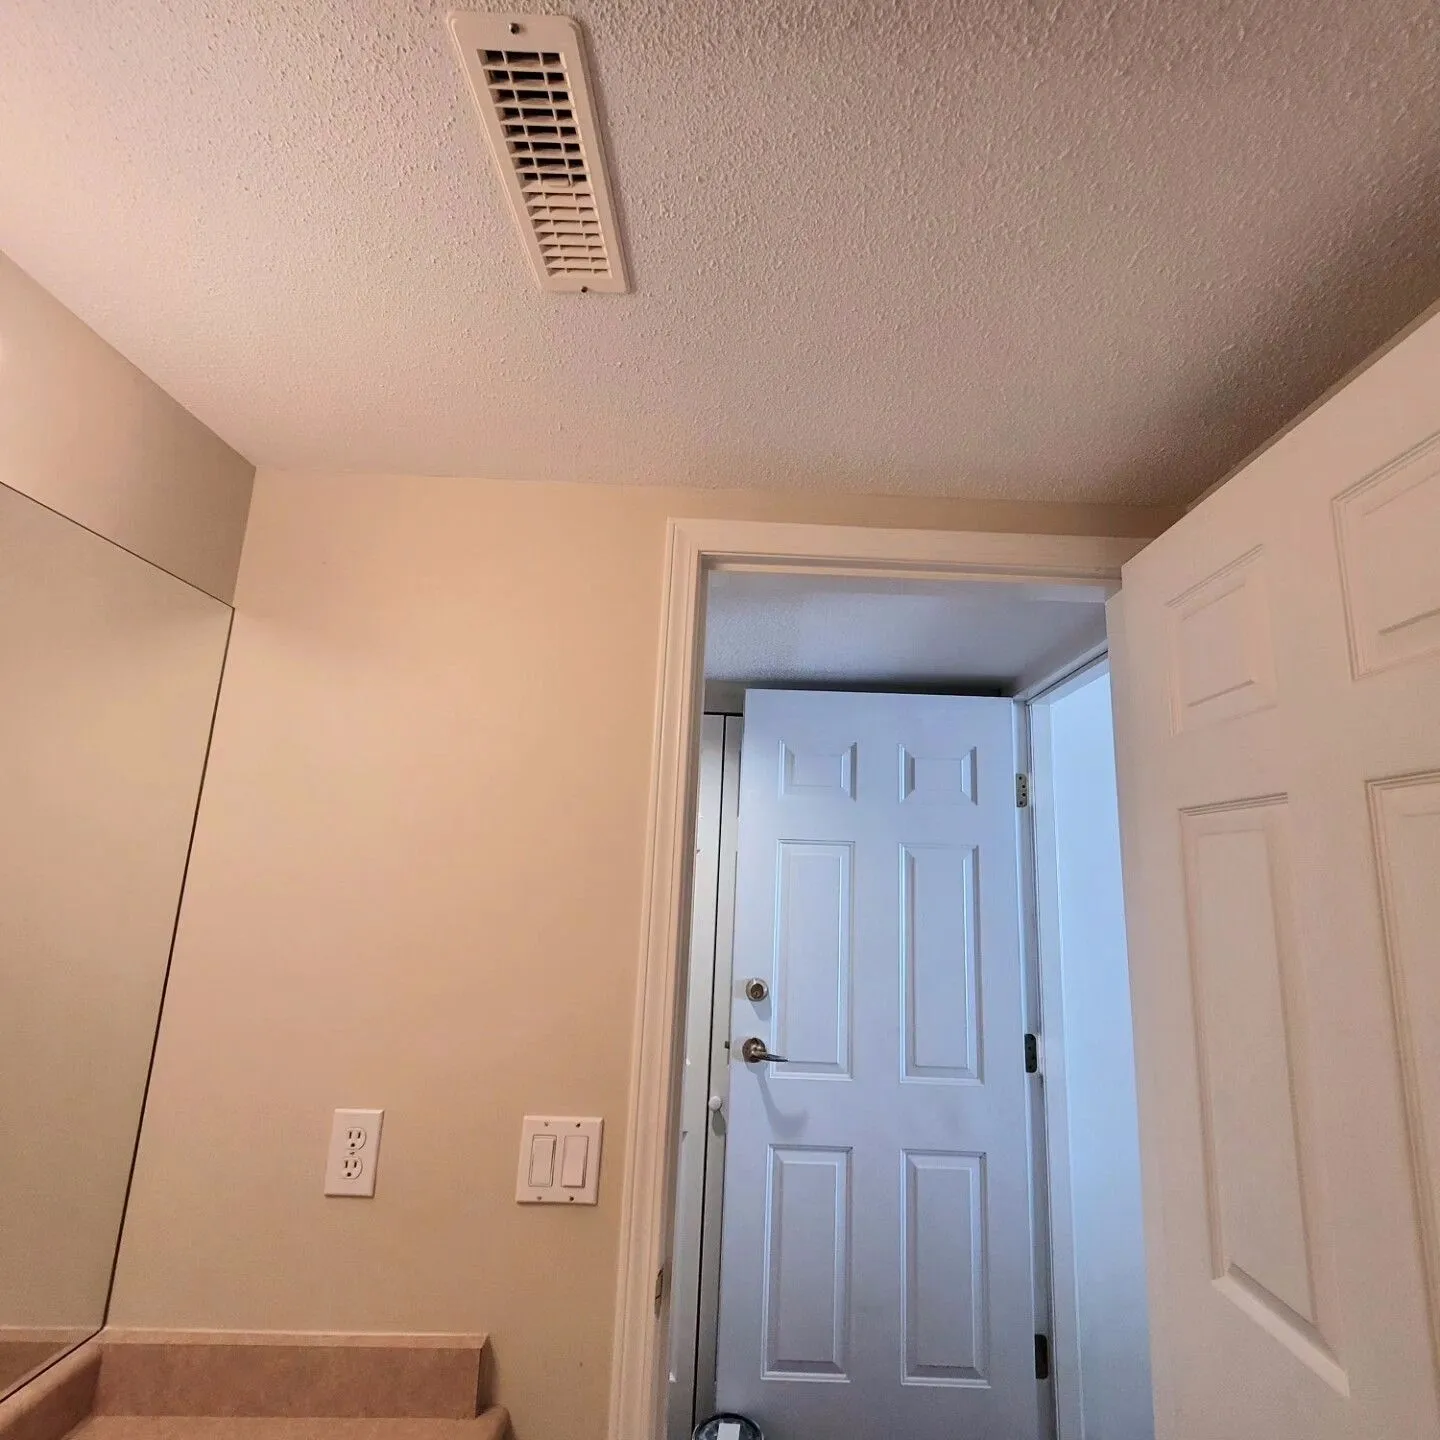 A door open to the inside of a room.